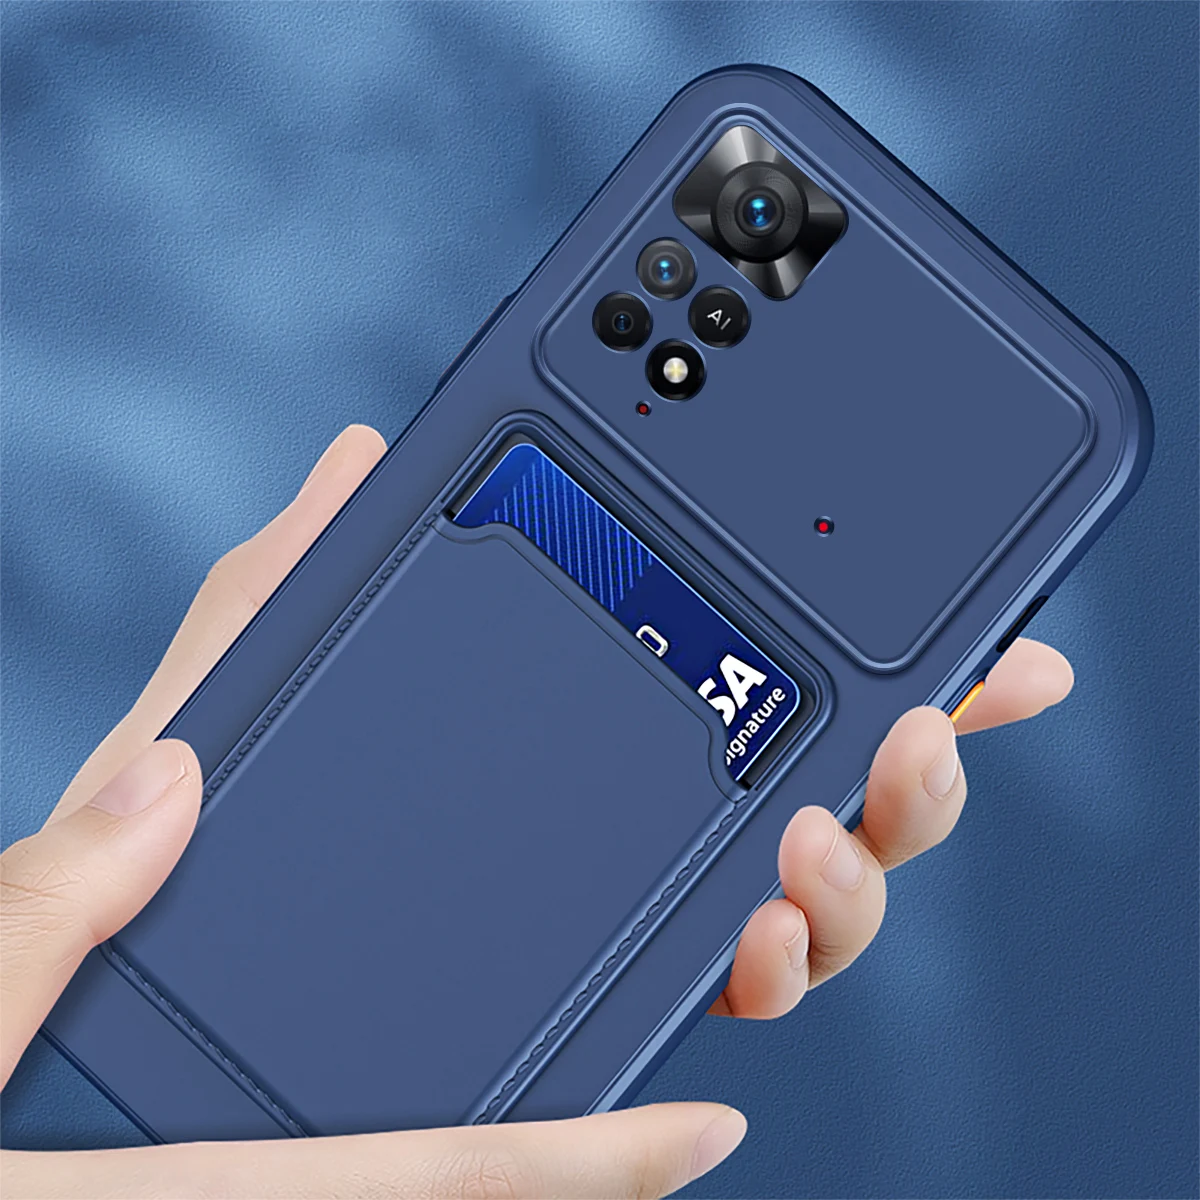 

Card Cell Phone Case For Infinix Inf Note 10 11i 11s Smart 5 Nfc Pro X697 X662 Celular Original New Soft Silicone Wallet Cover